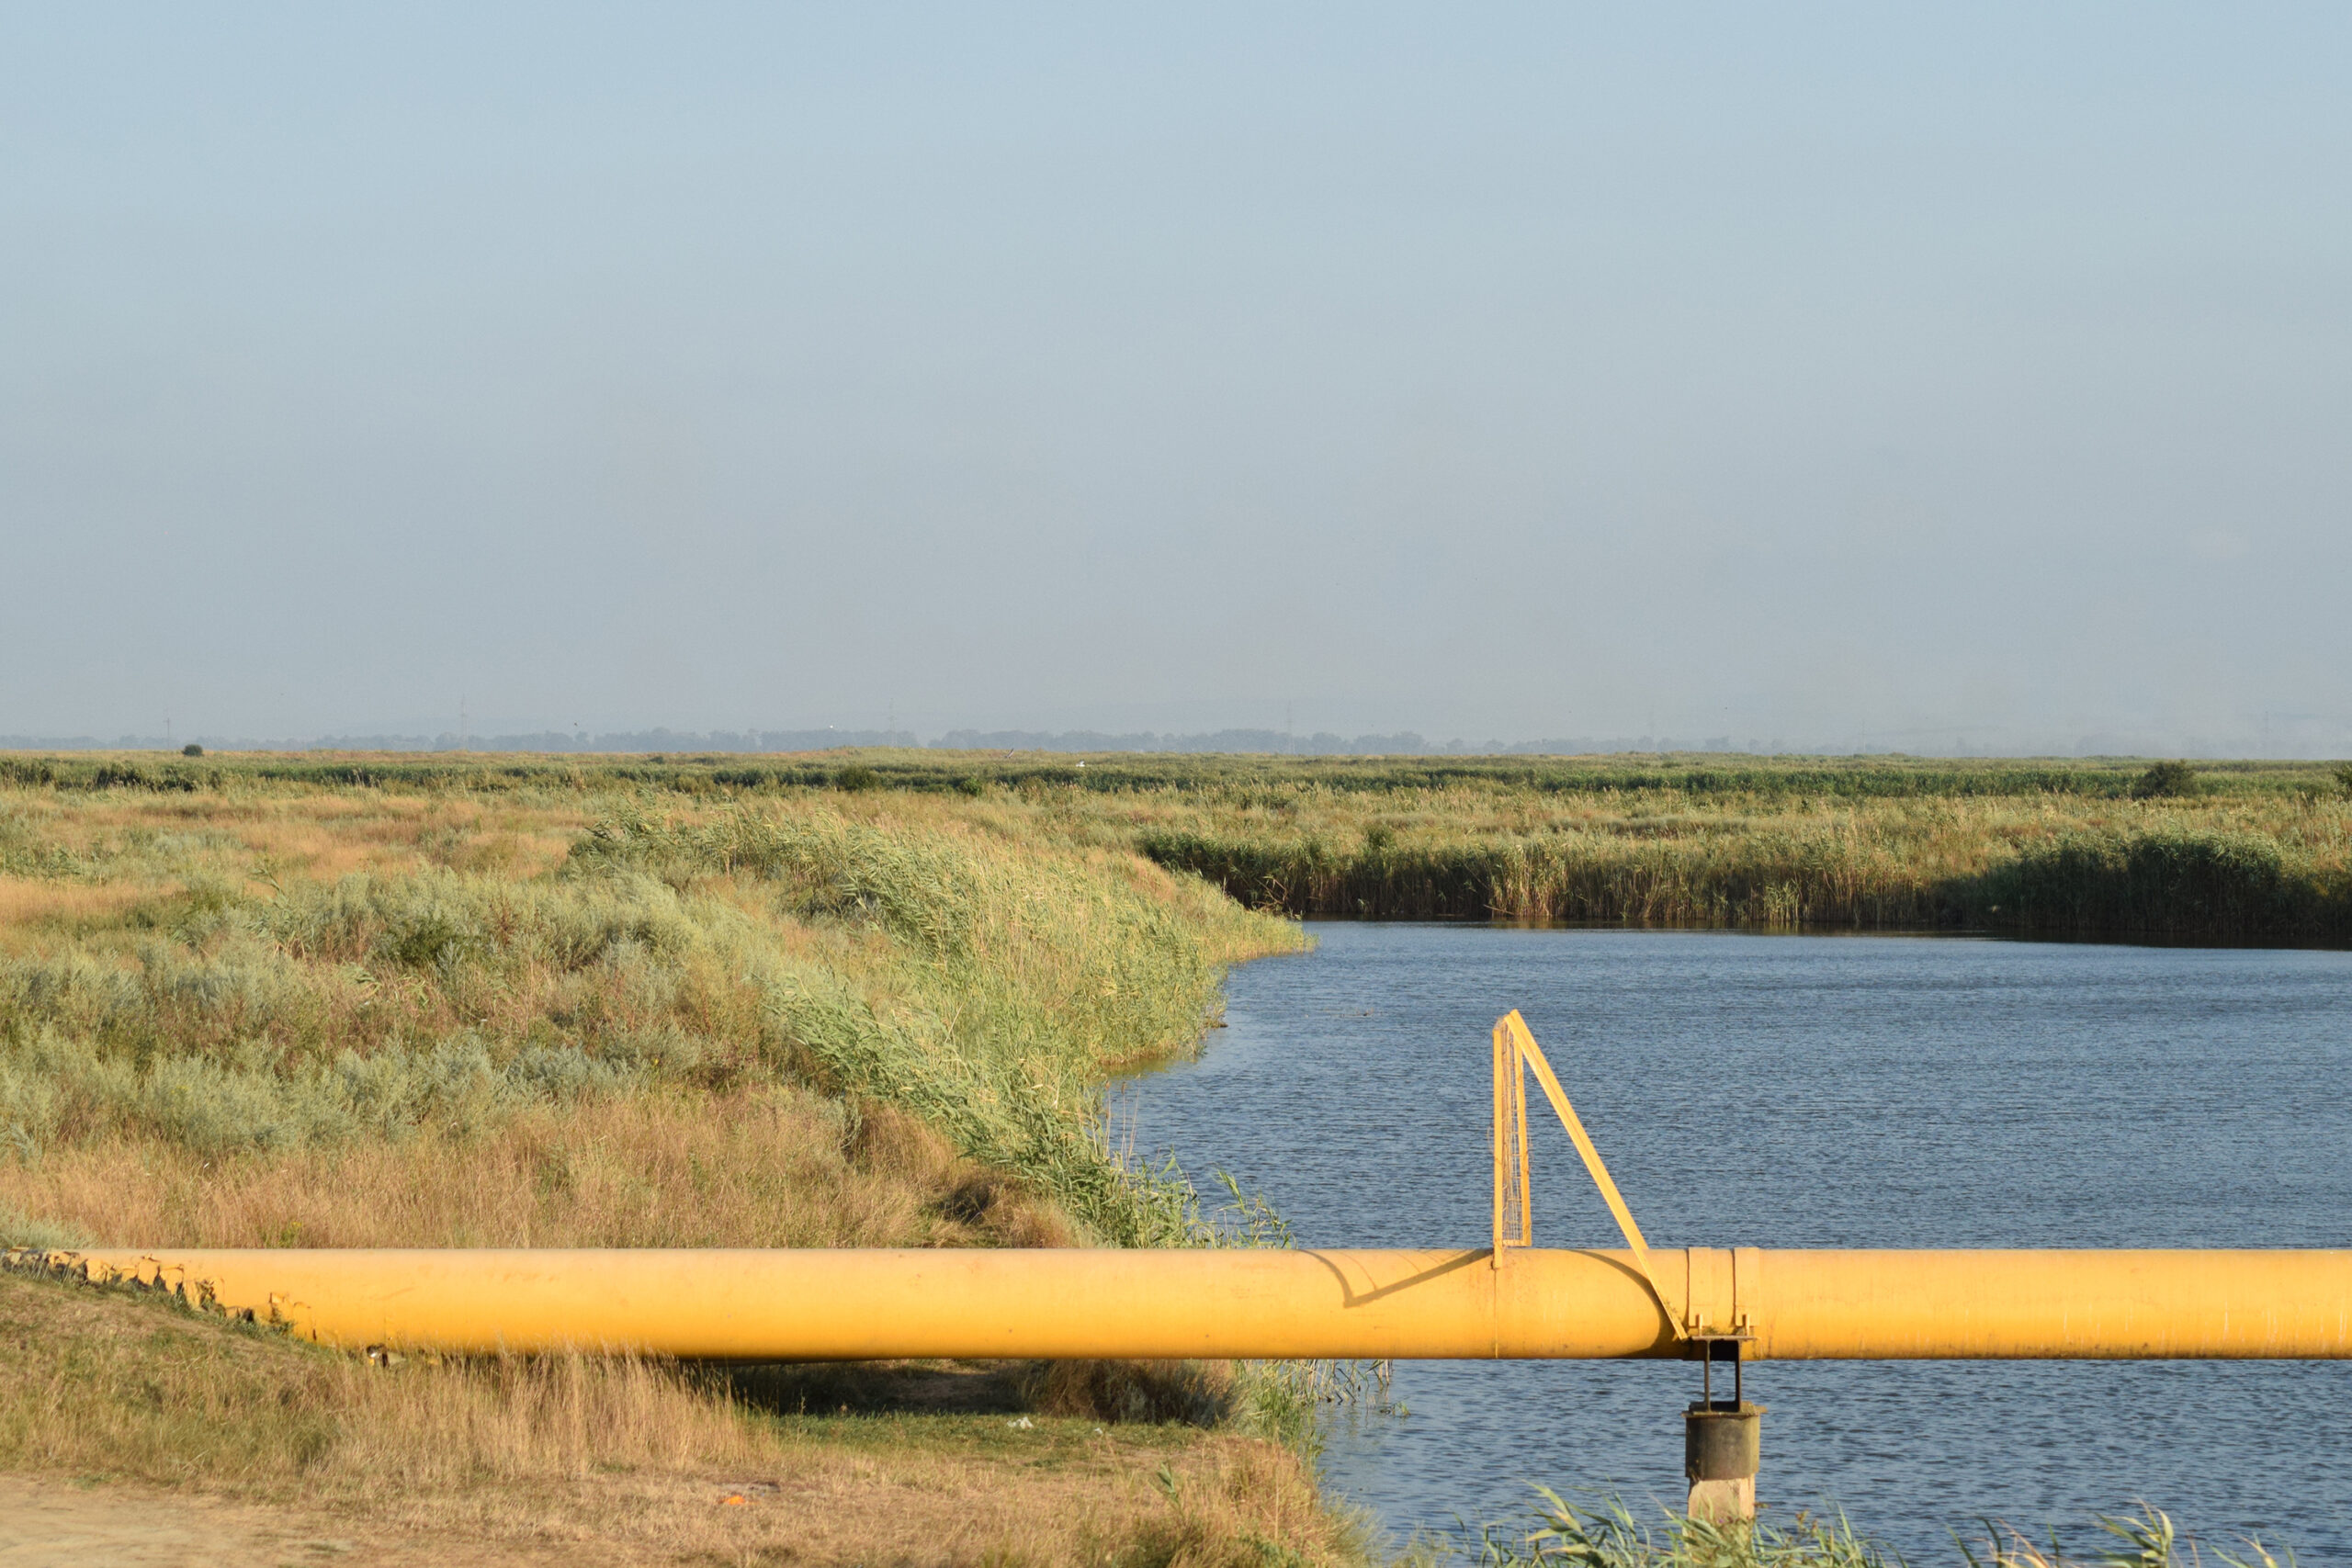 The gas pipeline through the small river